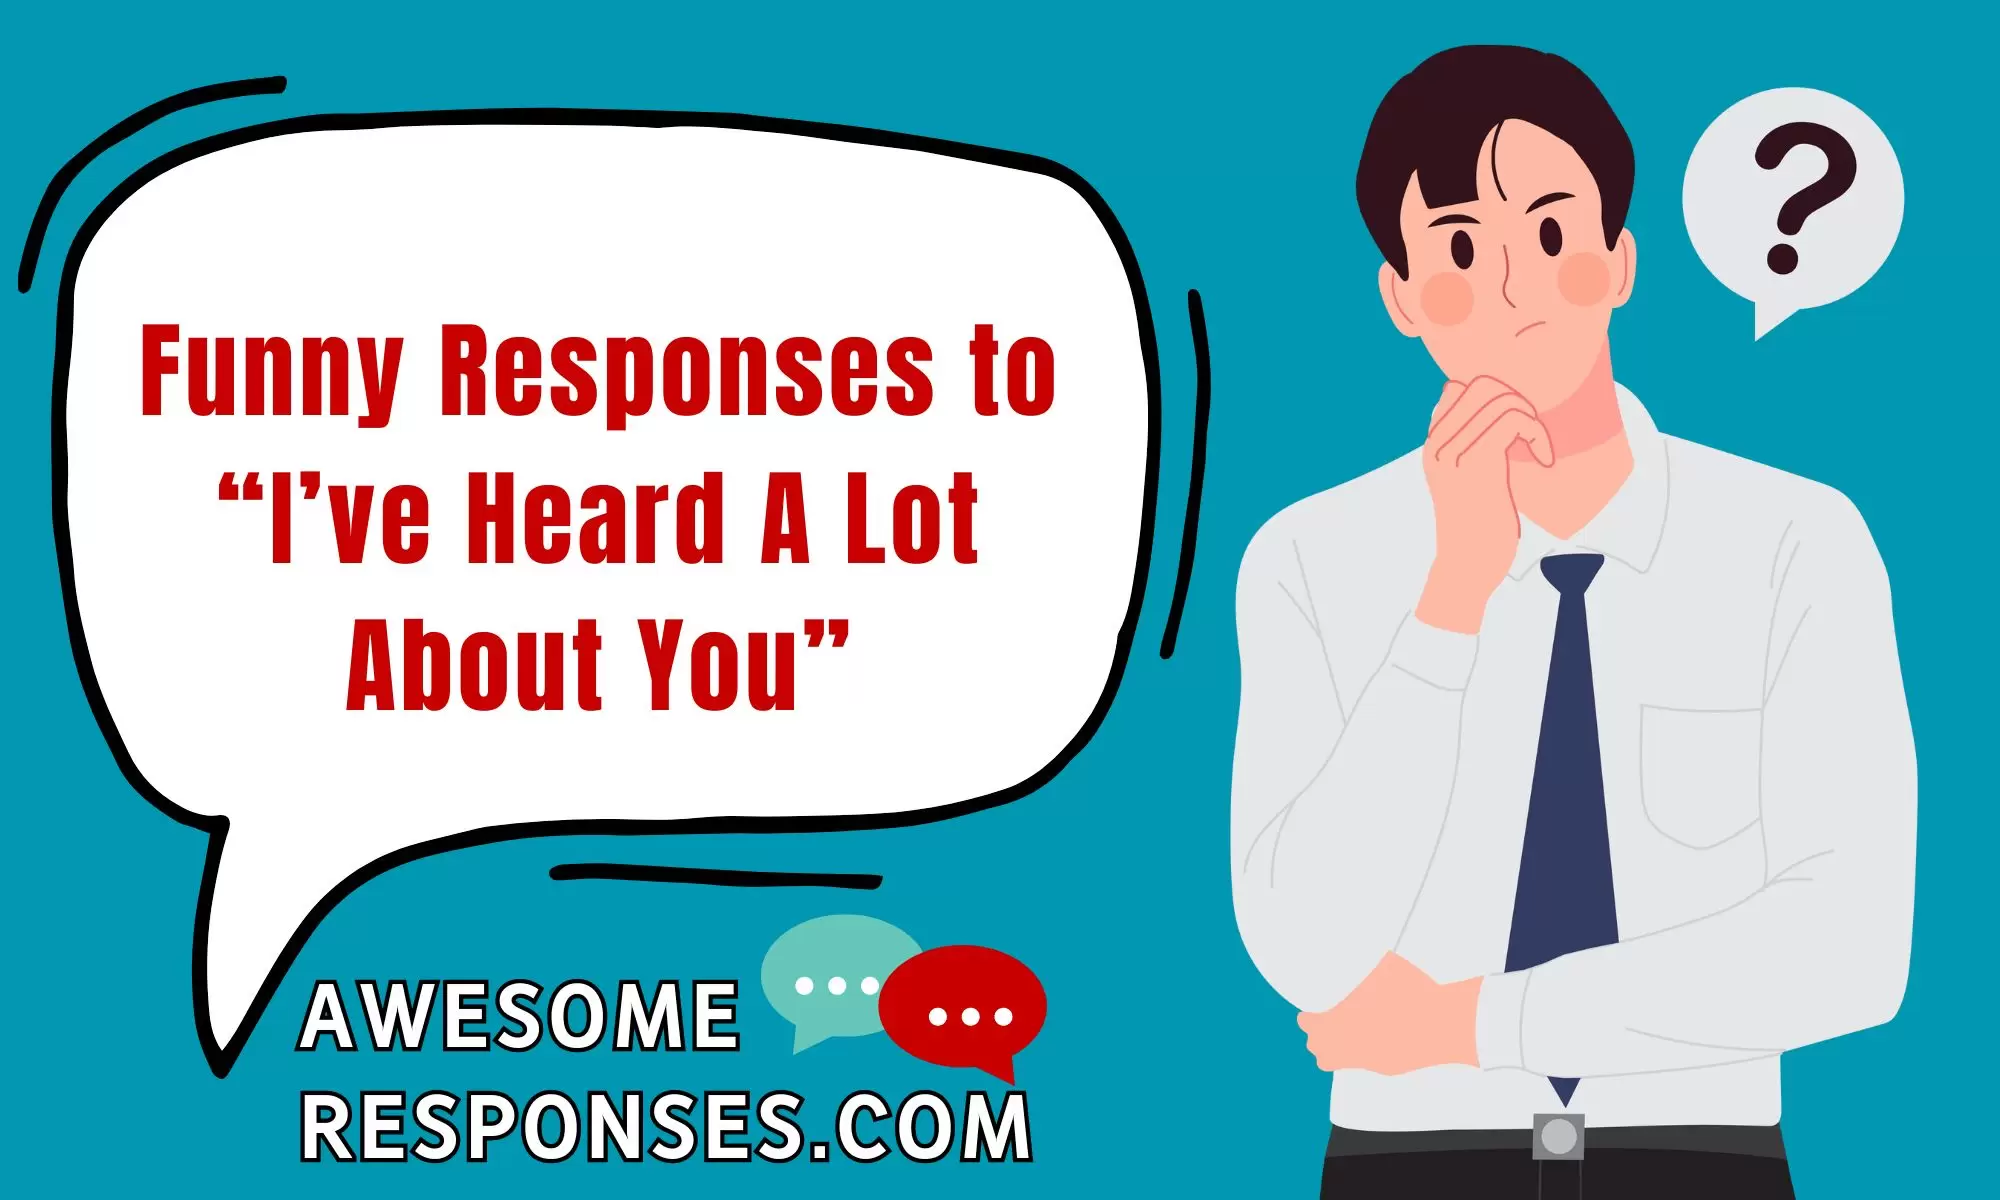 Funny Responses to “I’ve Heard A Lot About You”